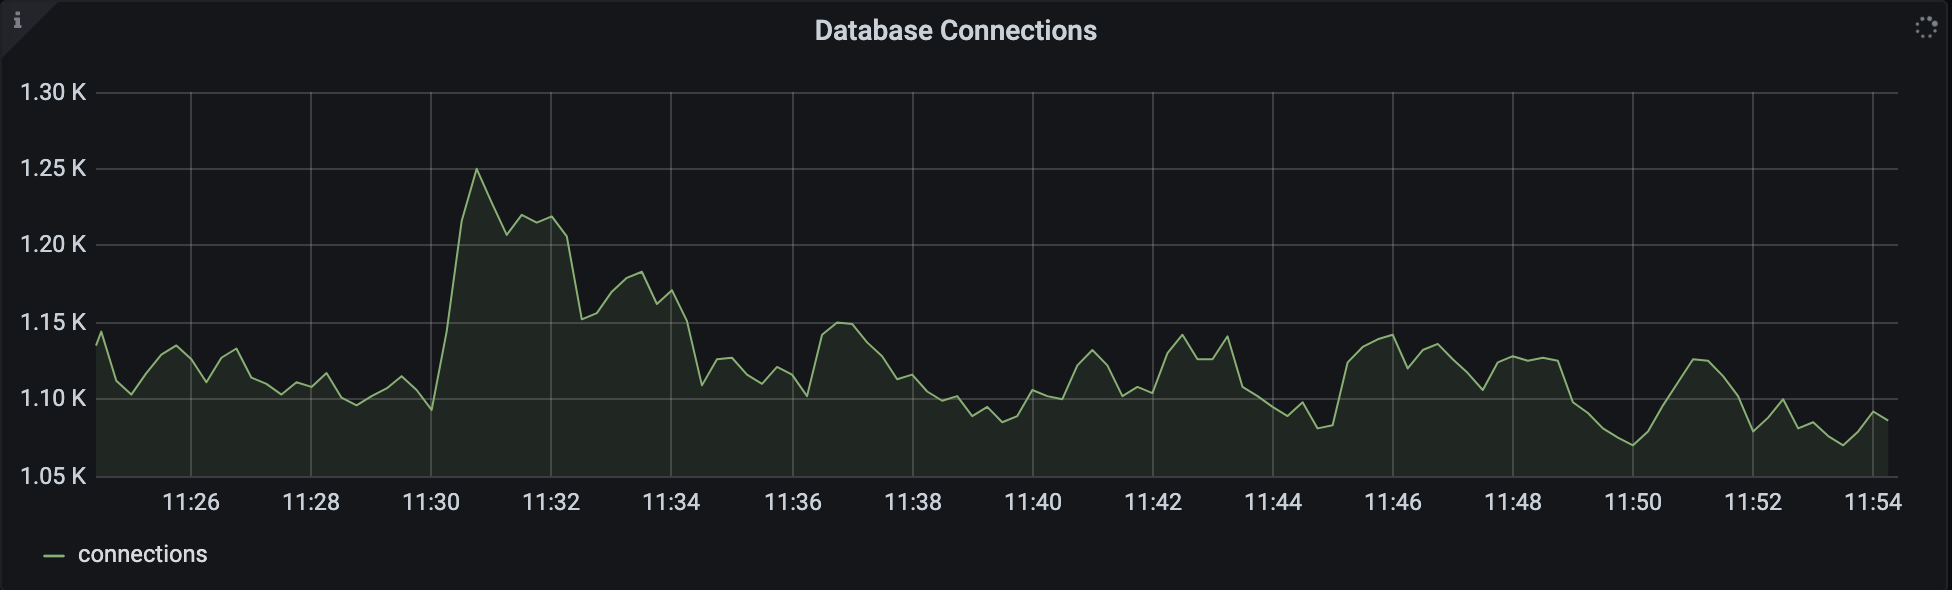 Database Connections Metric